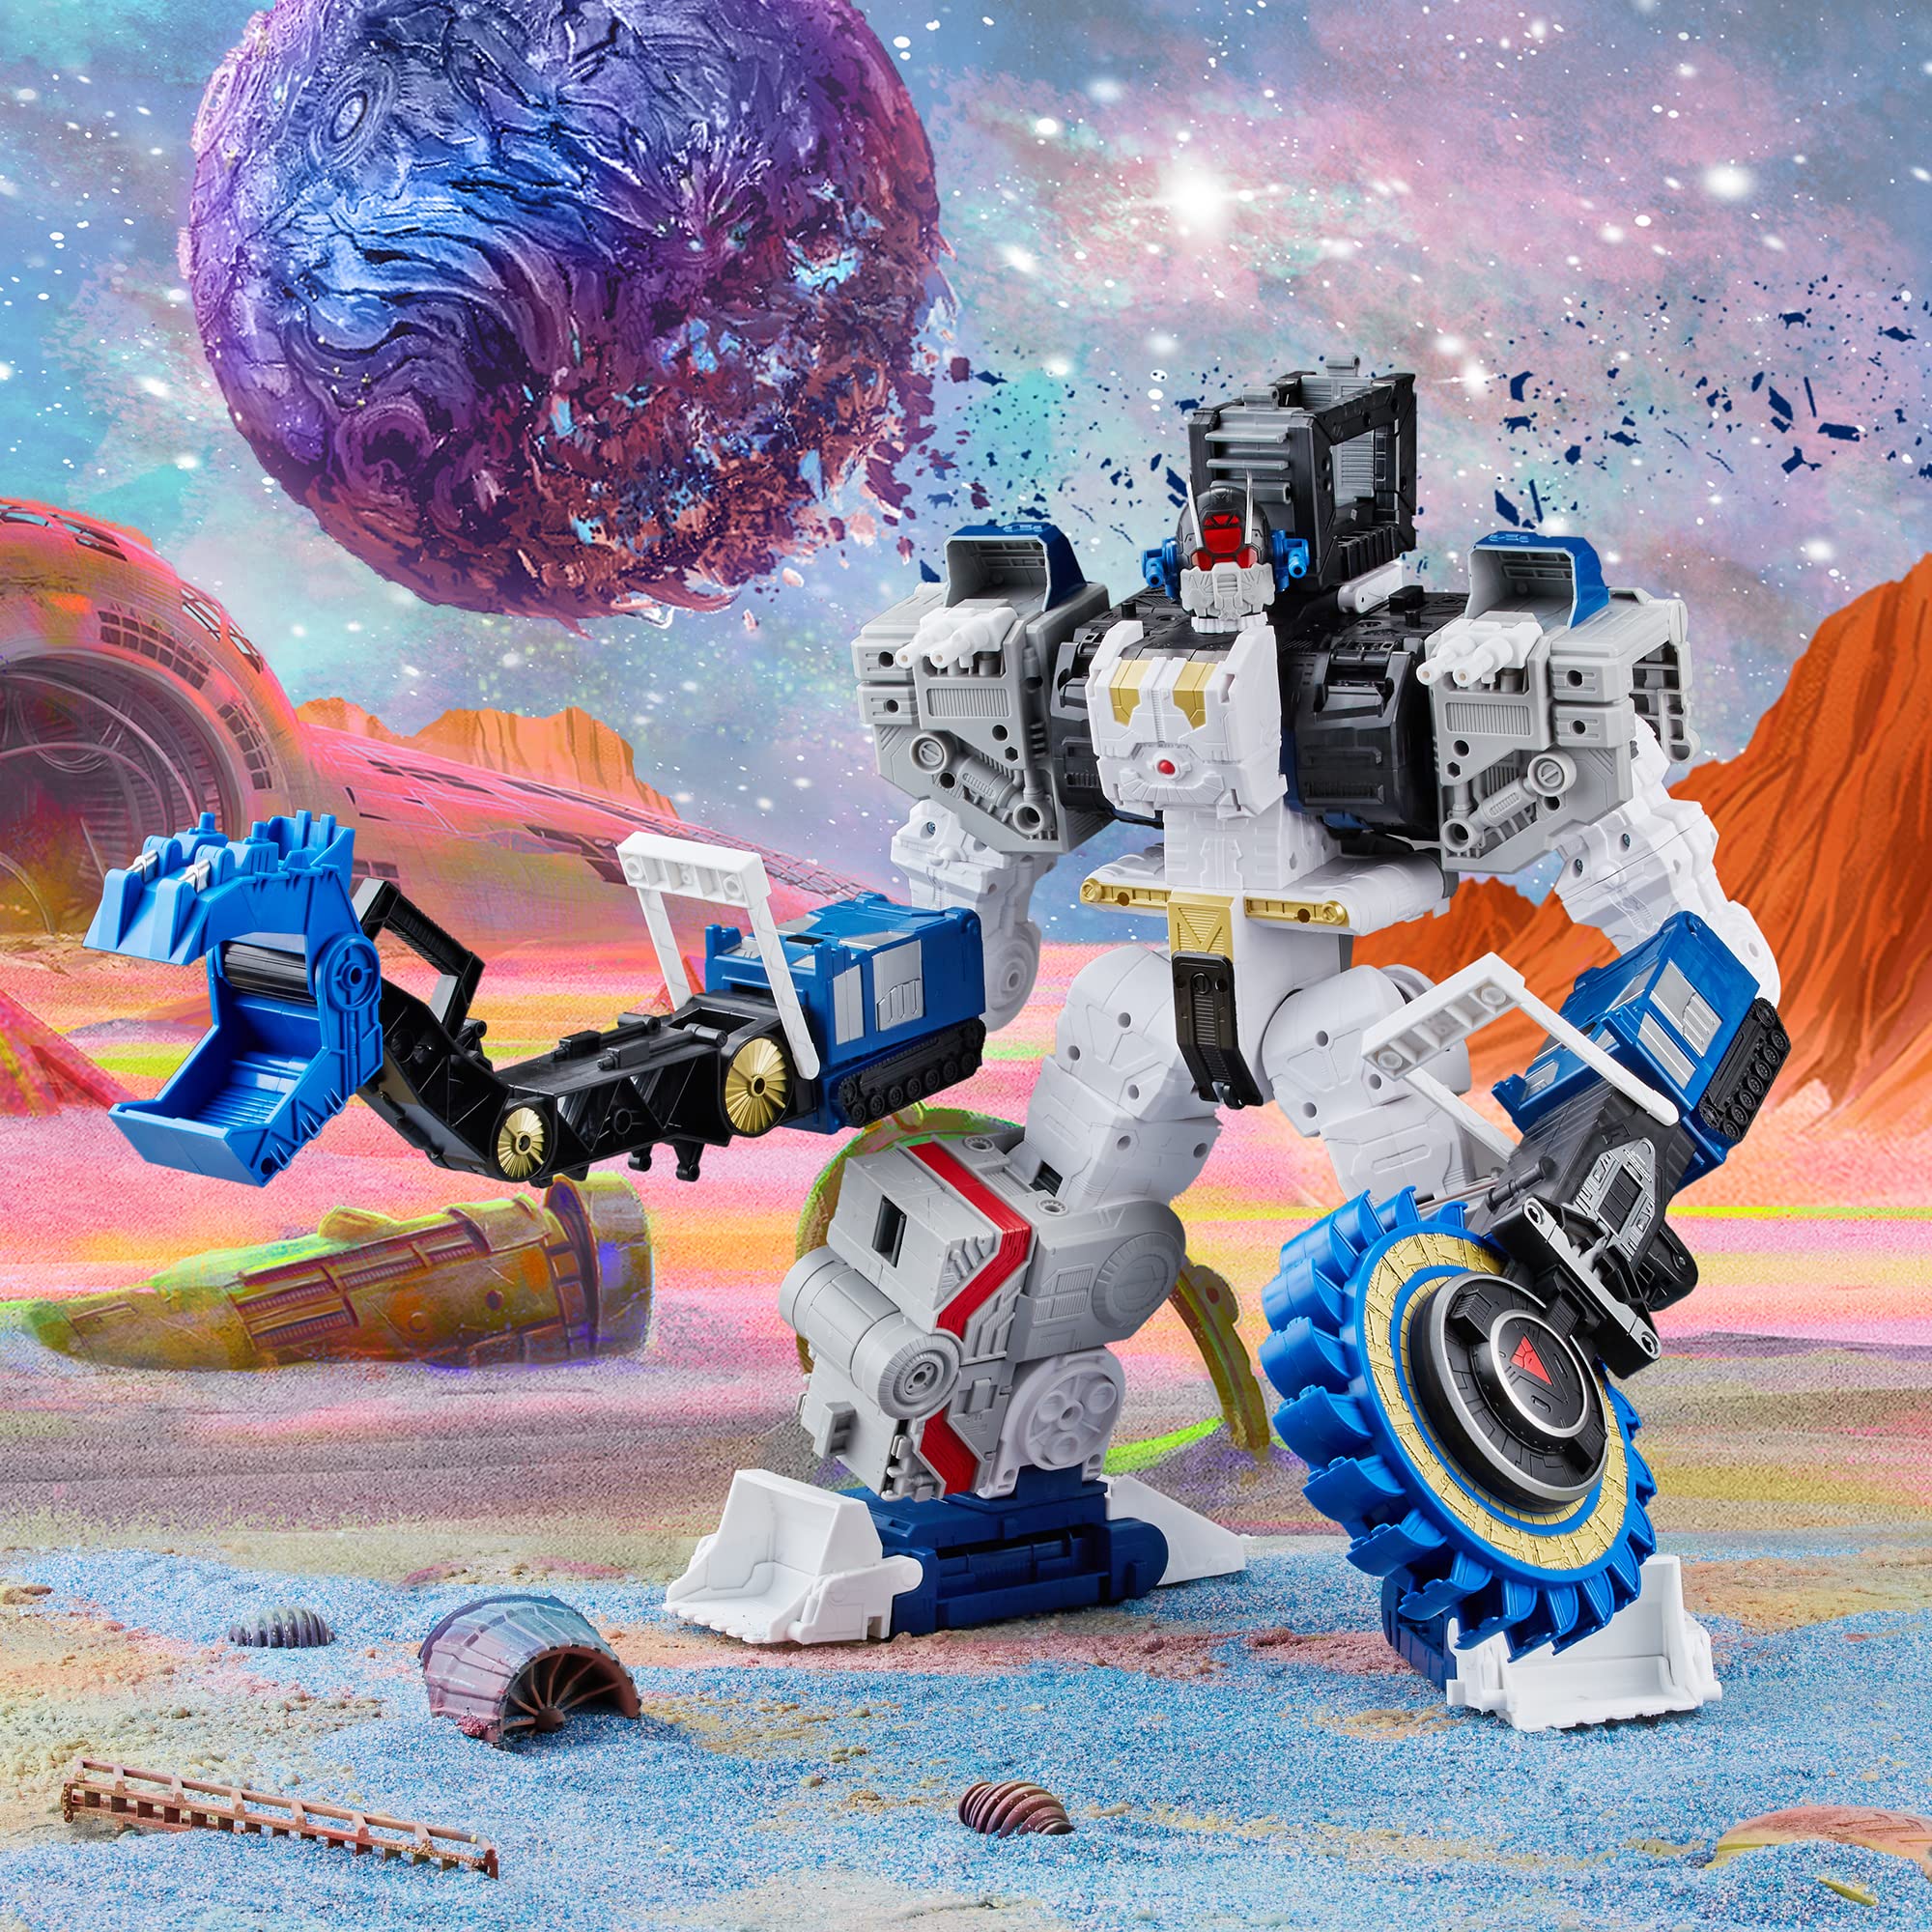 Transformers Toys Generations Legacy Series Titan Cybertron Universe Metroplex Action Figure - Ages 15 and Up, 22-inch